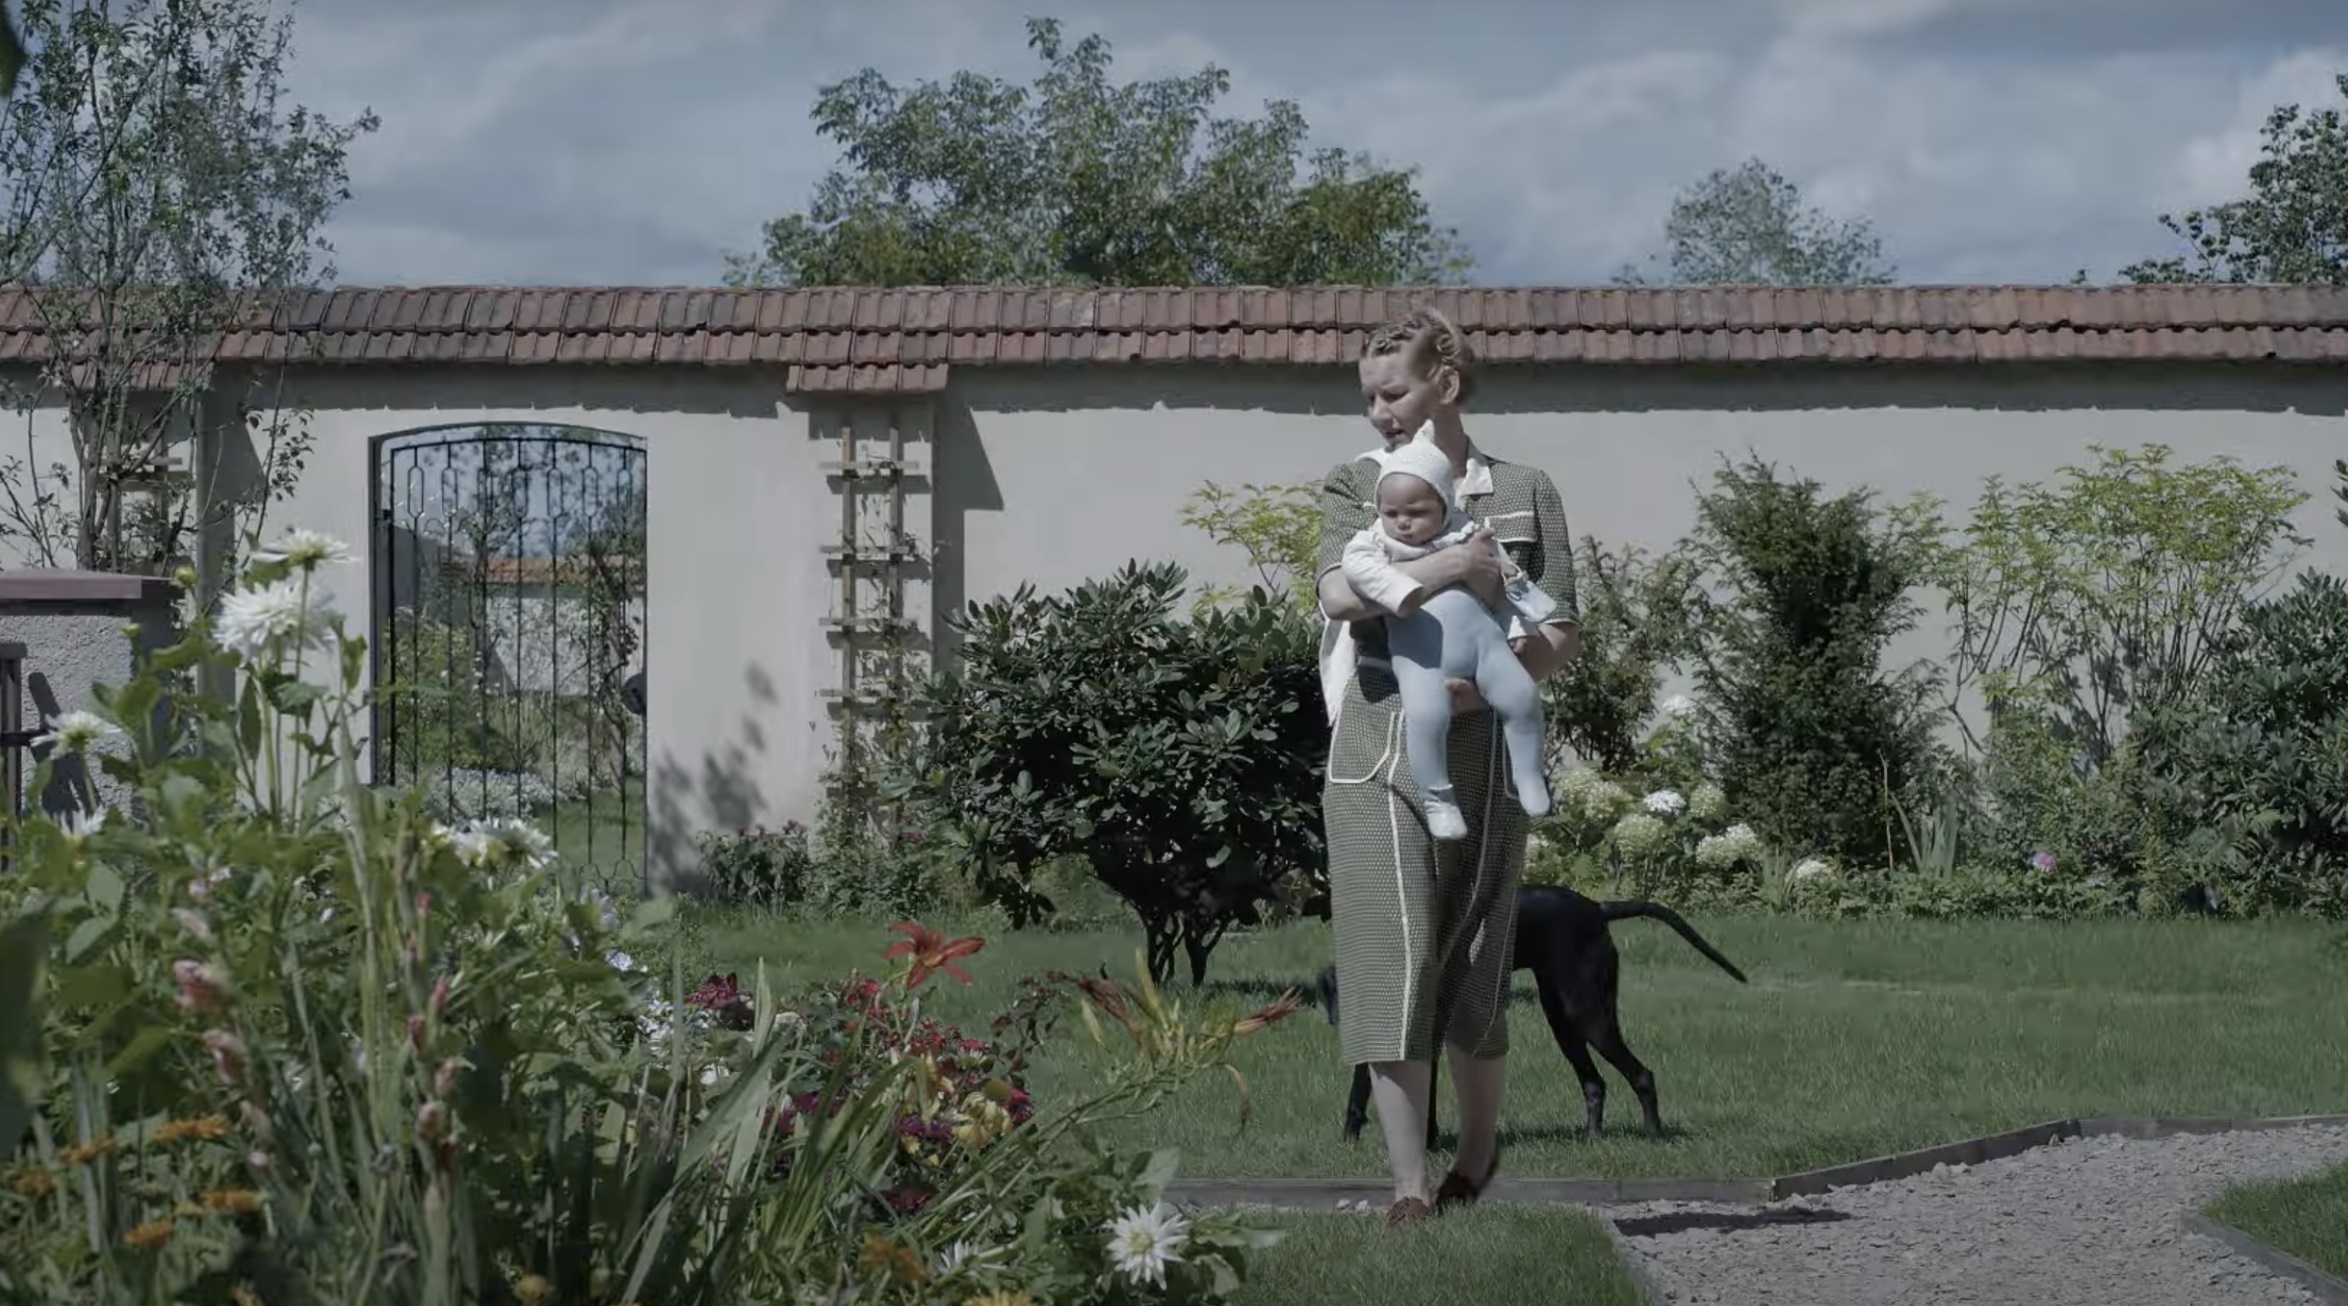 A woman in 1940-era clothing stands in a walled garden clutching a baby. A dog stands behind them.